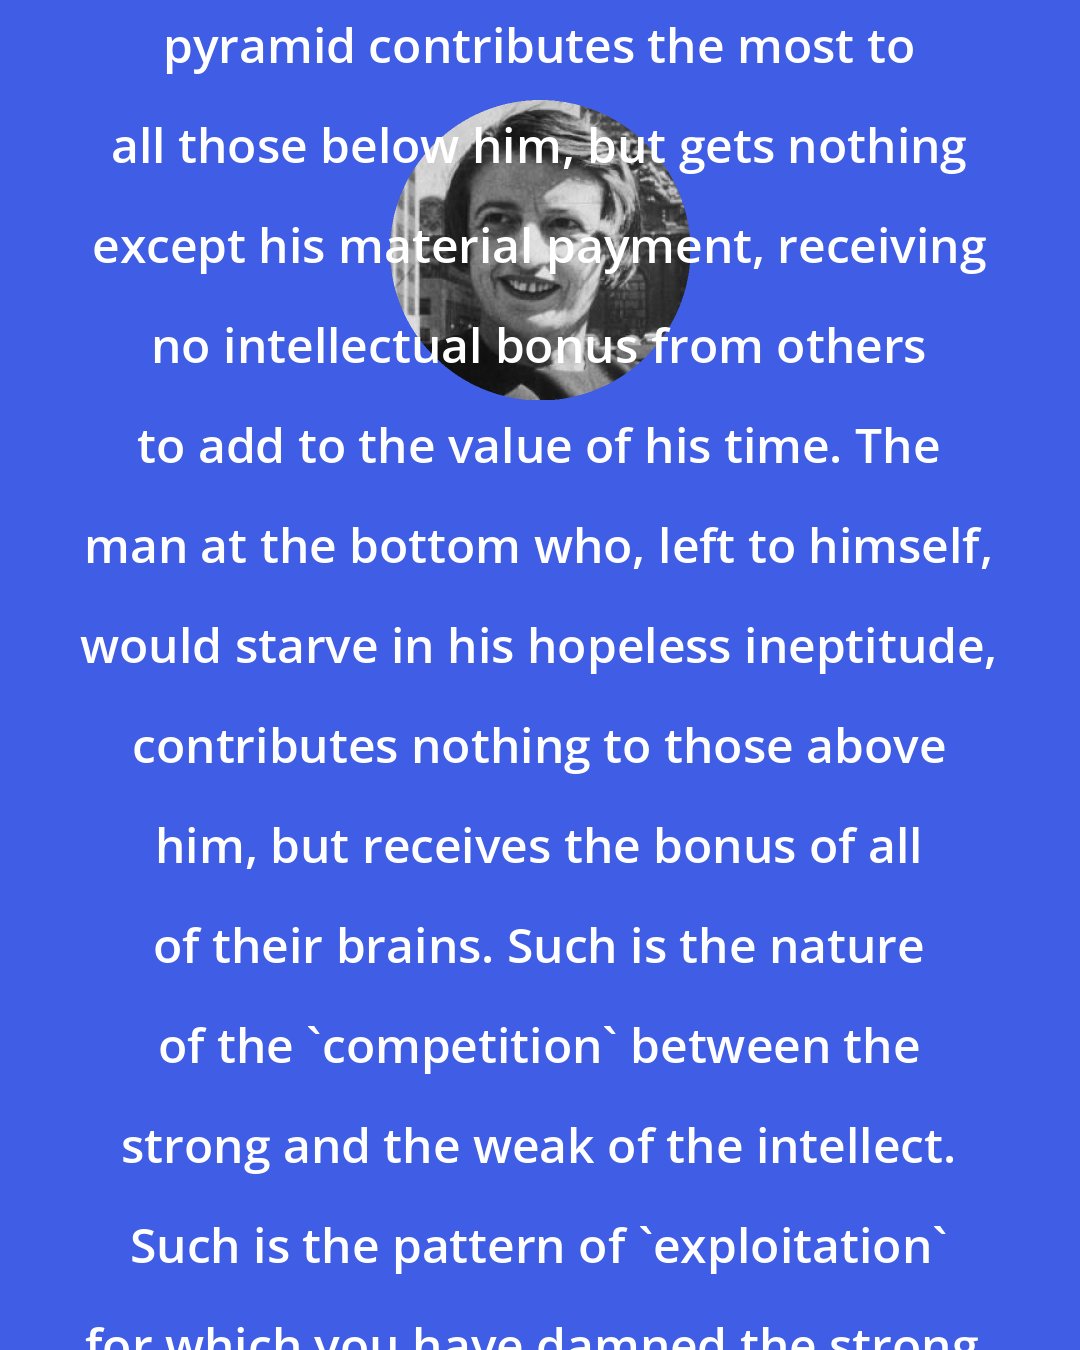 Ayn Rand: The man at the top of the intellectual pyramid contributes the most to all those below him, but gets nothing except his material payment, receiving no intellectual bonus from others to add to the value of his time. The man at the bottom who, left to himself, would starve in his hopeless ineptitude, contributes nothing to those above him, but receives the bonus of all of their brains. Such is the nature of the 'competition' between the strong and the weak of the intellect. Such is the pattern of 'exploitation' for which you have damned the strong.